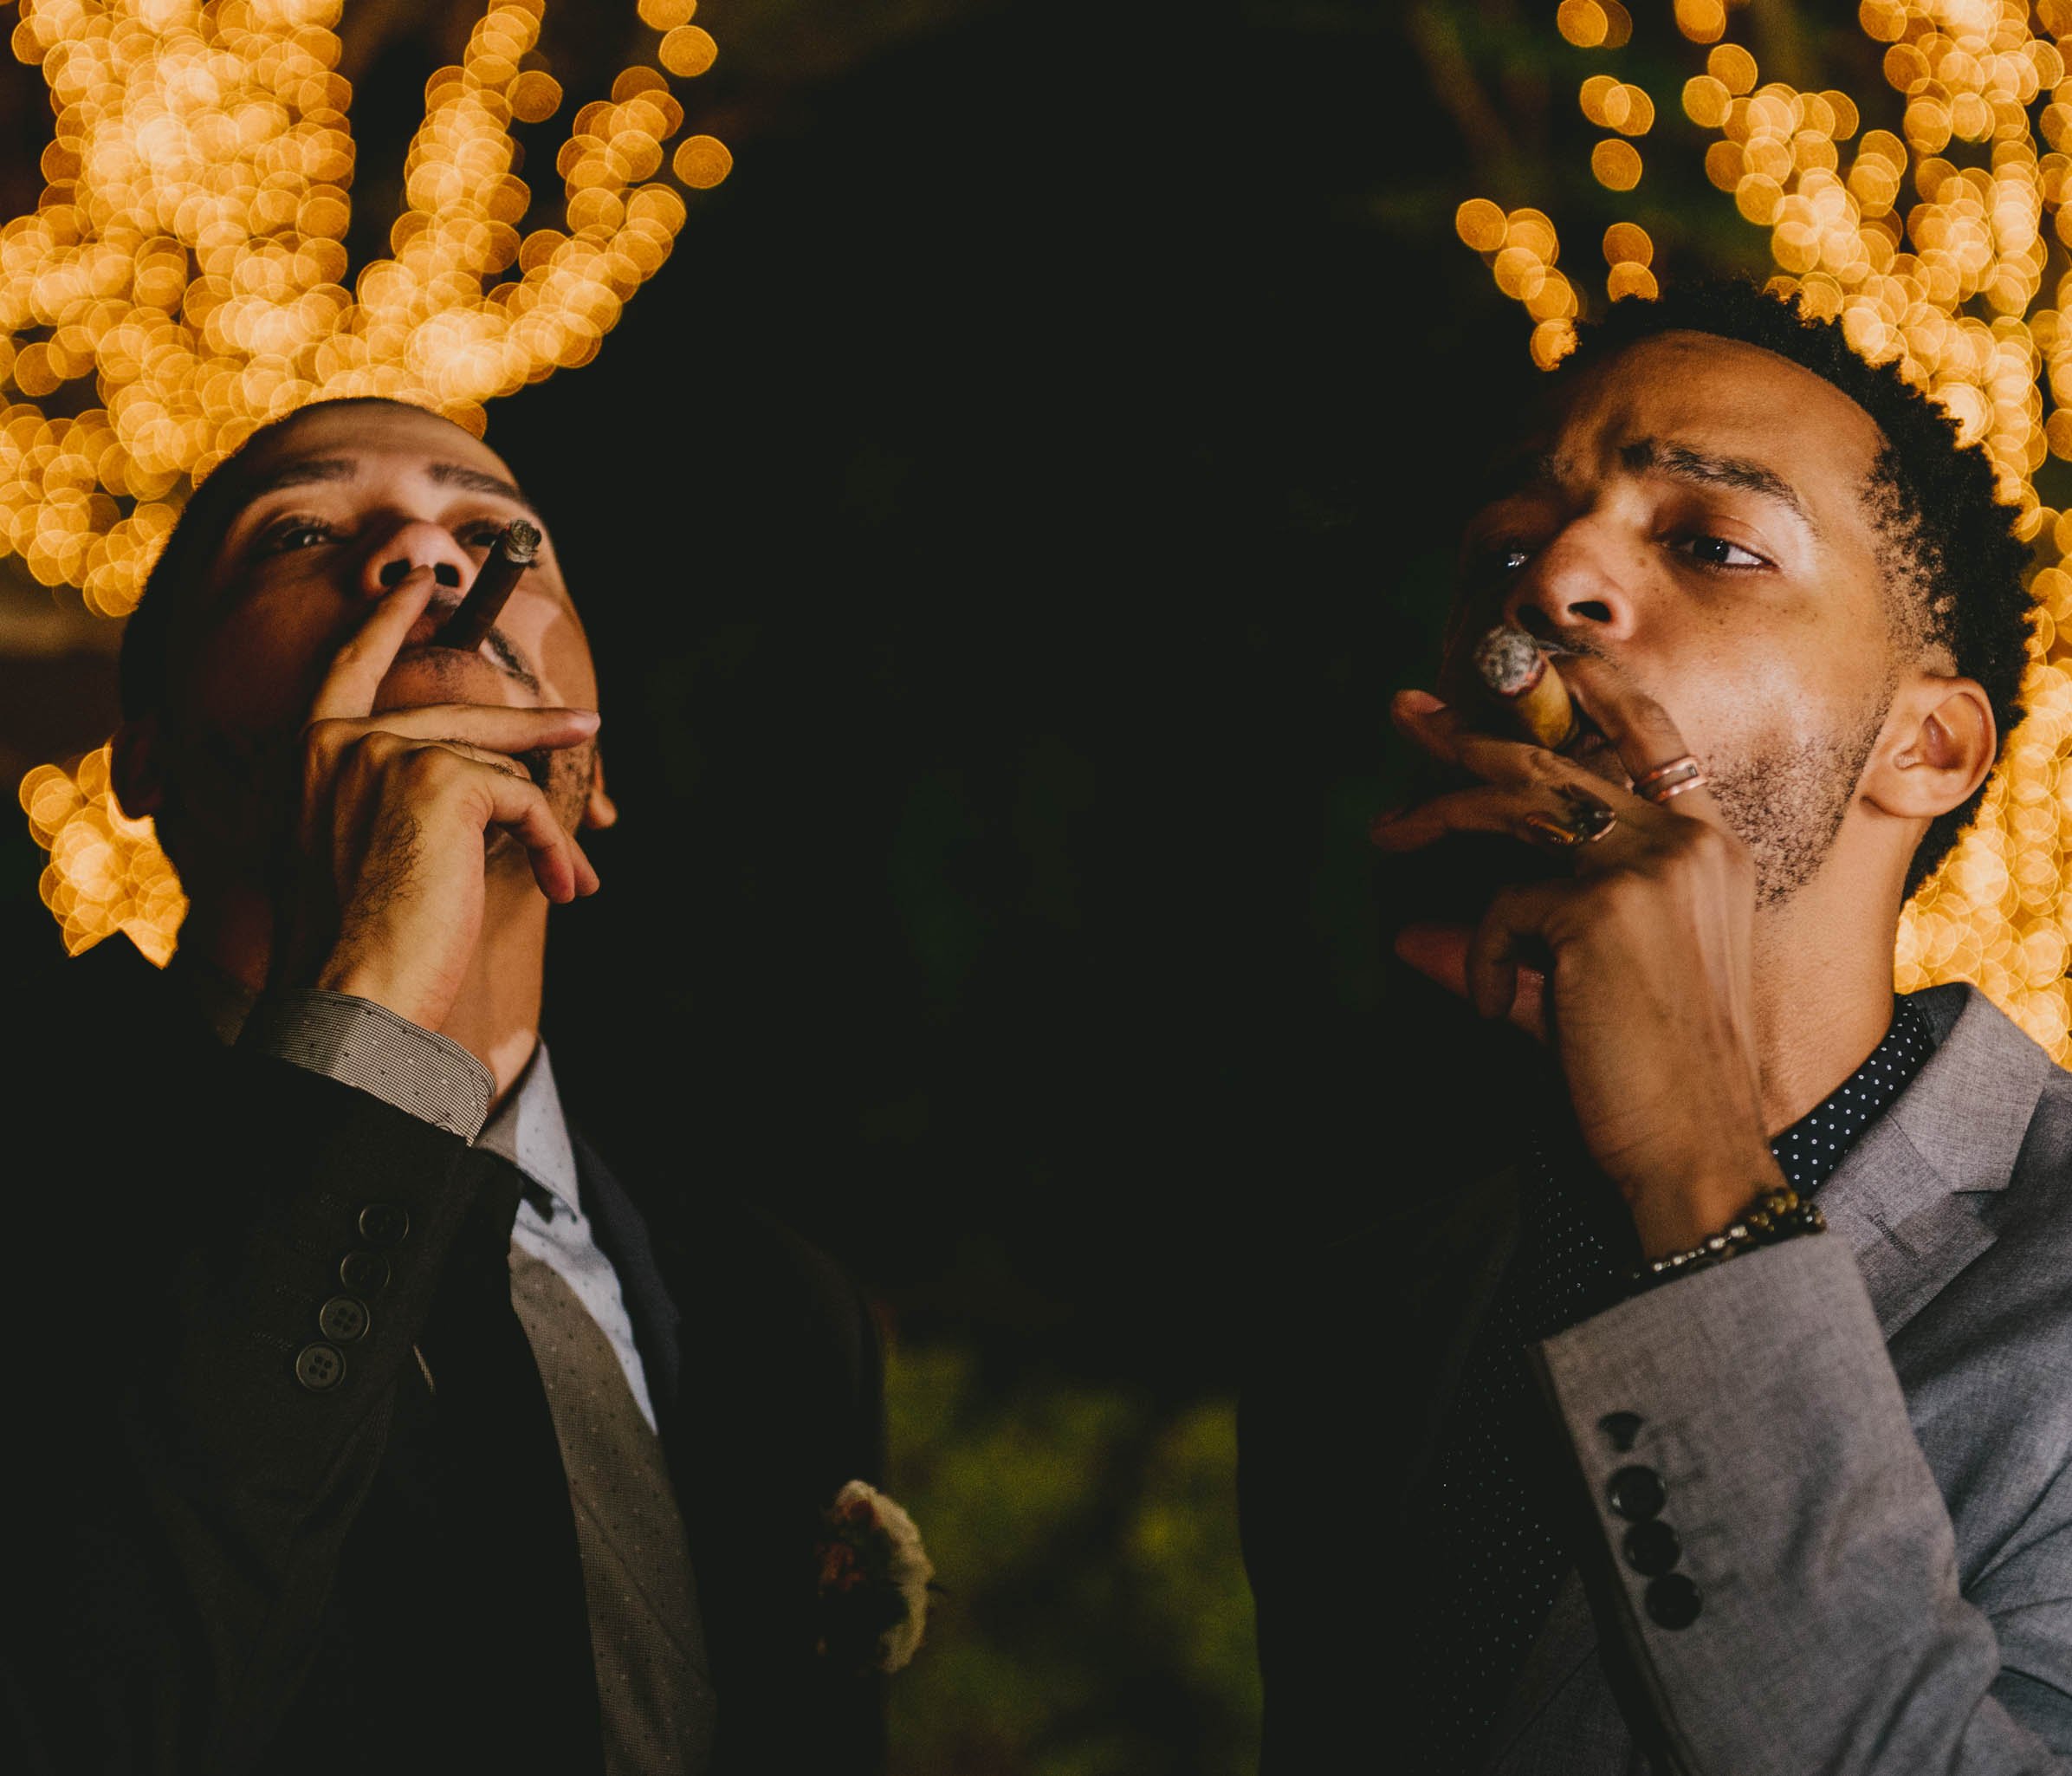 Two guests enjoy custom rolled cigars at this Umstead Hotel wedding